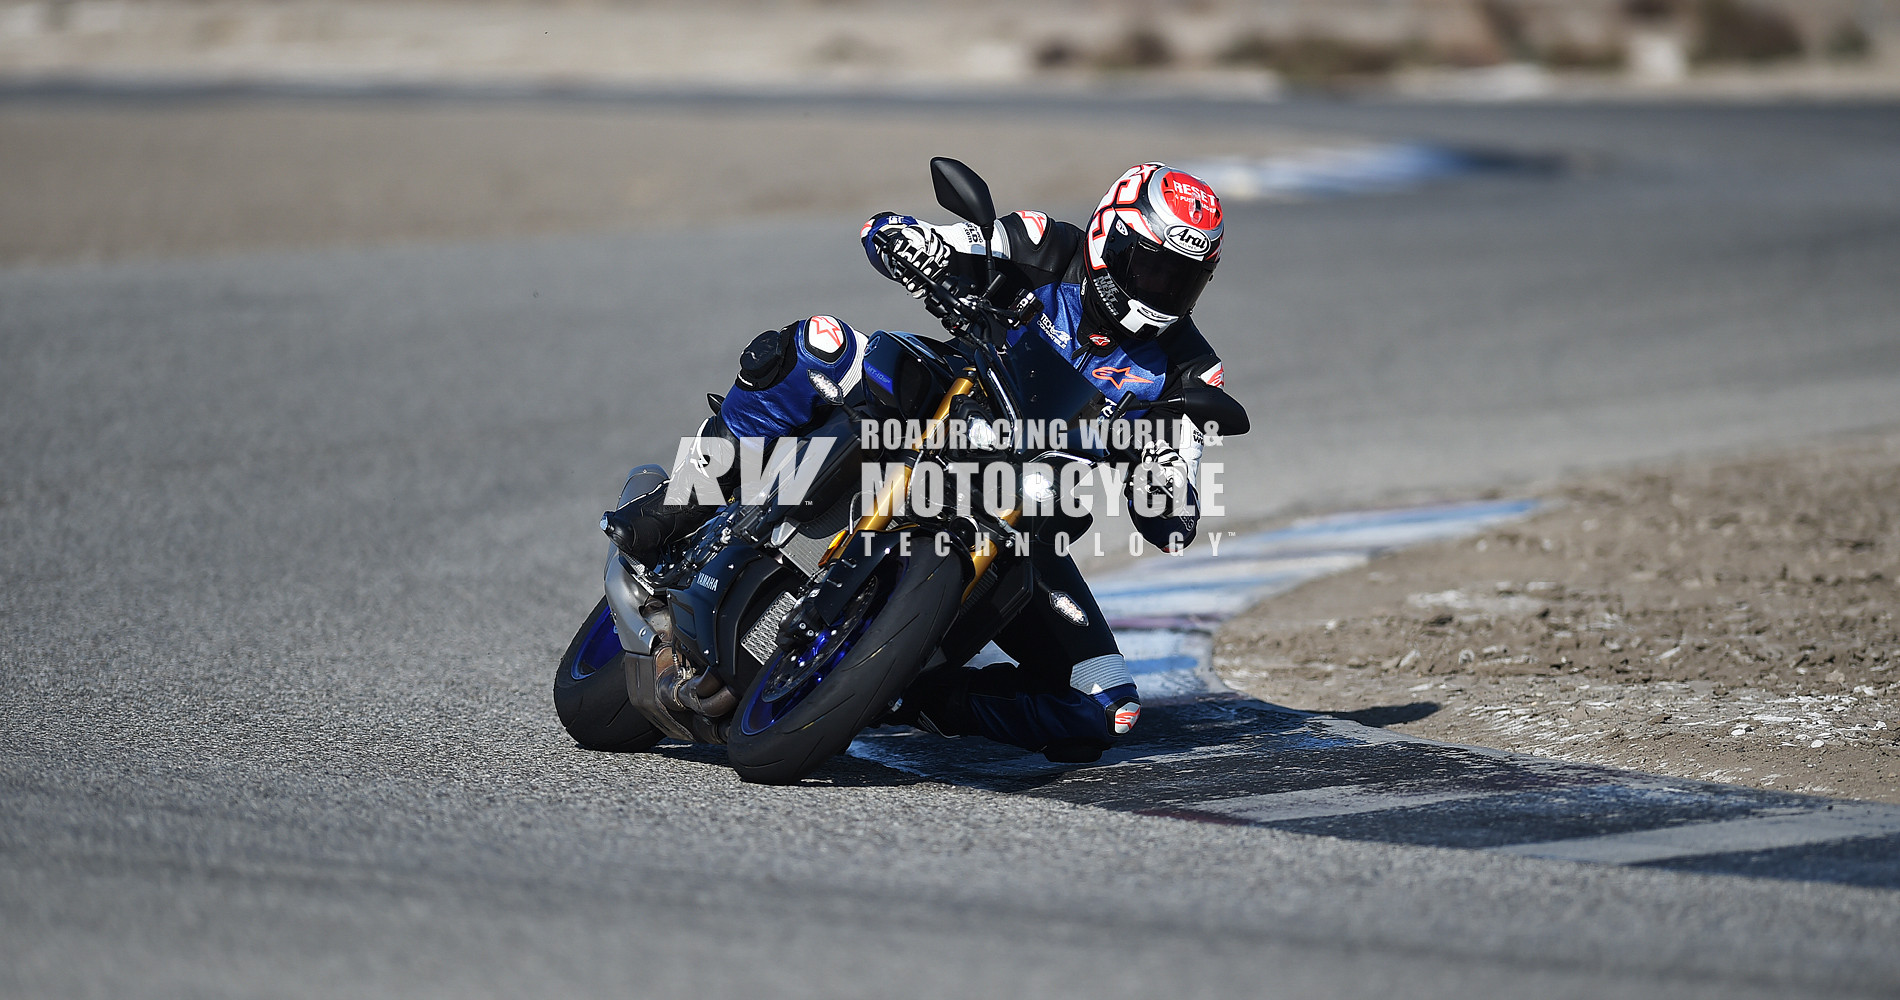 Racing Editor Chris Ulrich on the Yamaha MT-10 SP in the dry at Buttonwillow. He liked the bike's torque and overall fun factor.